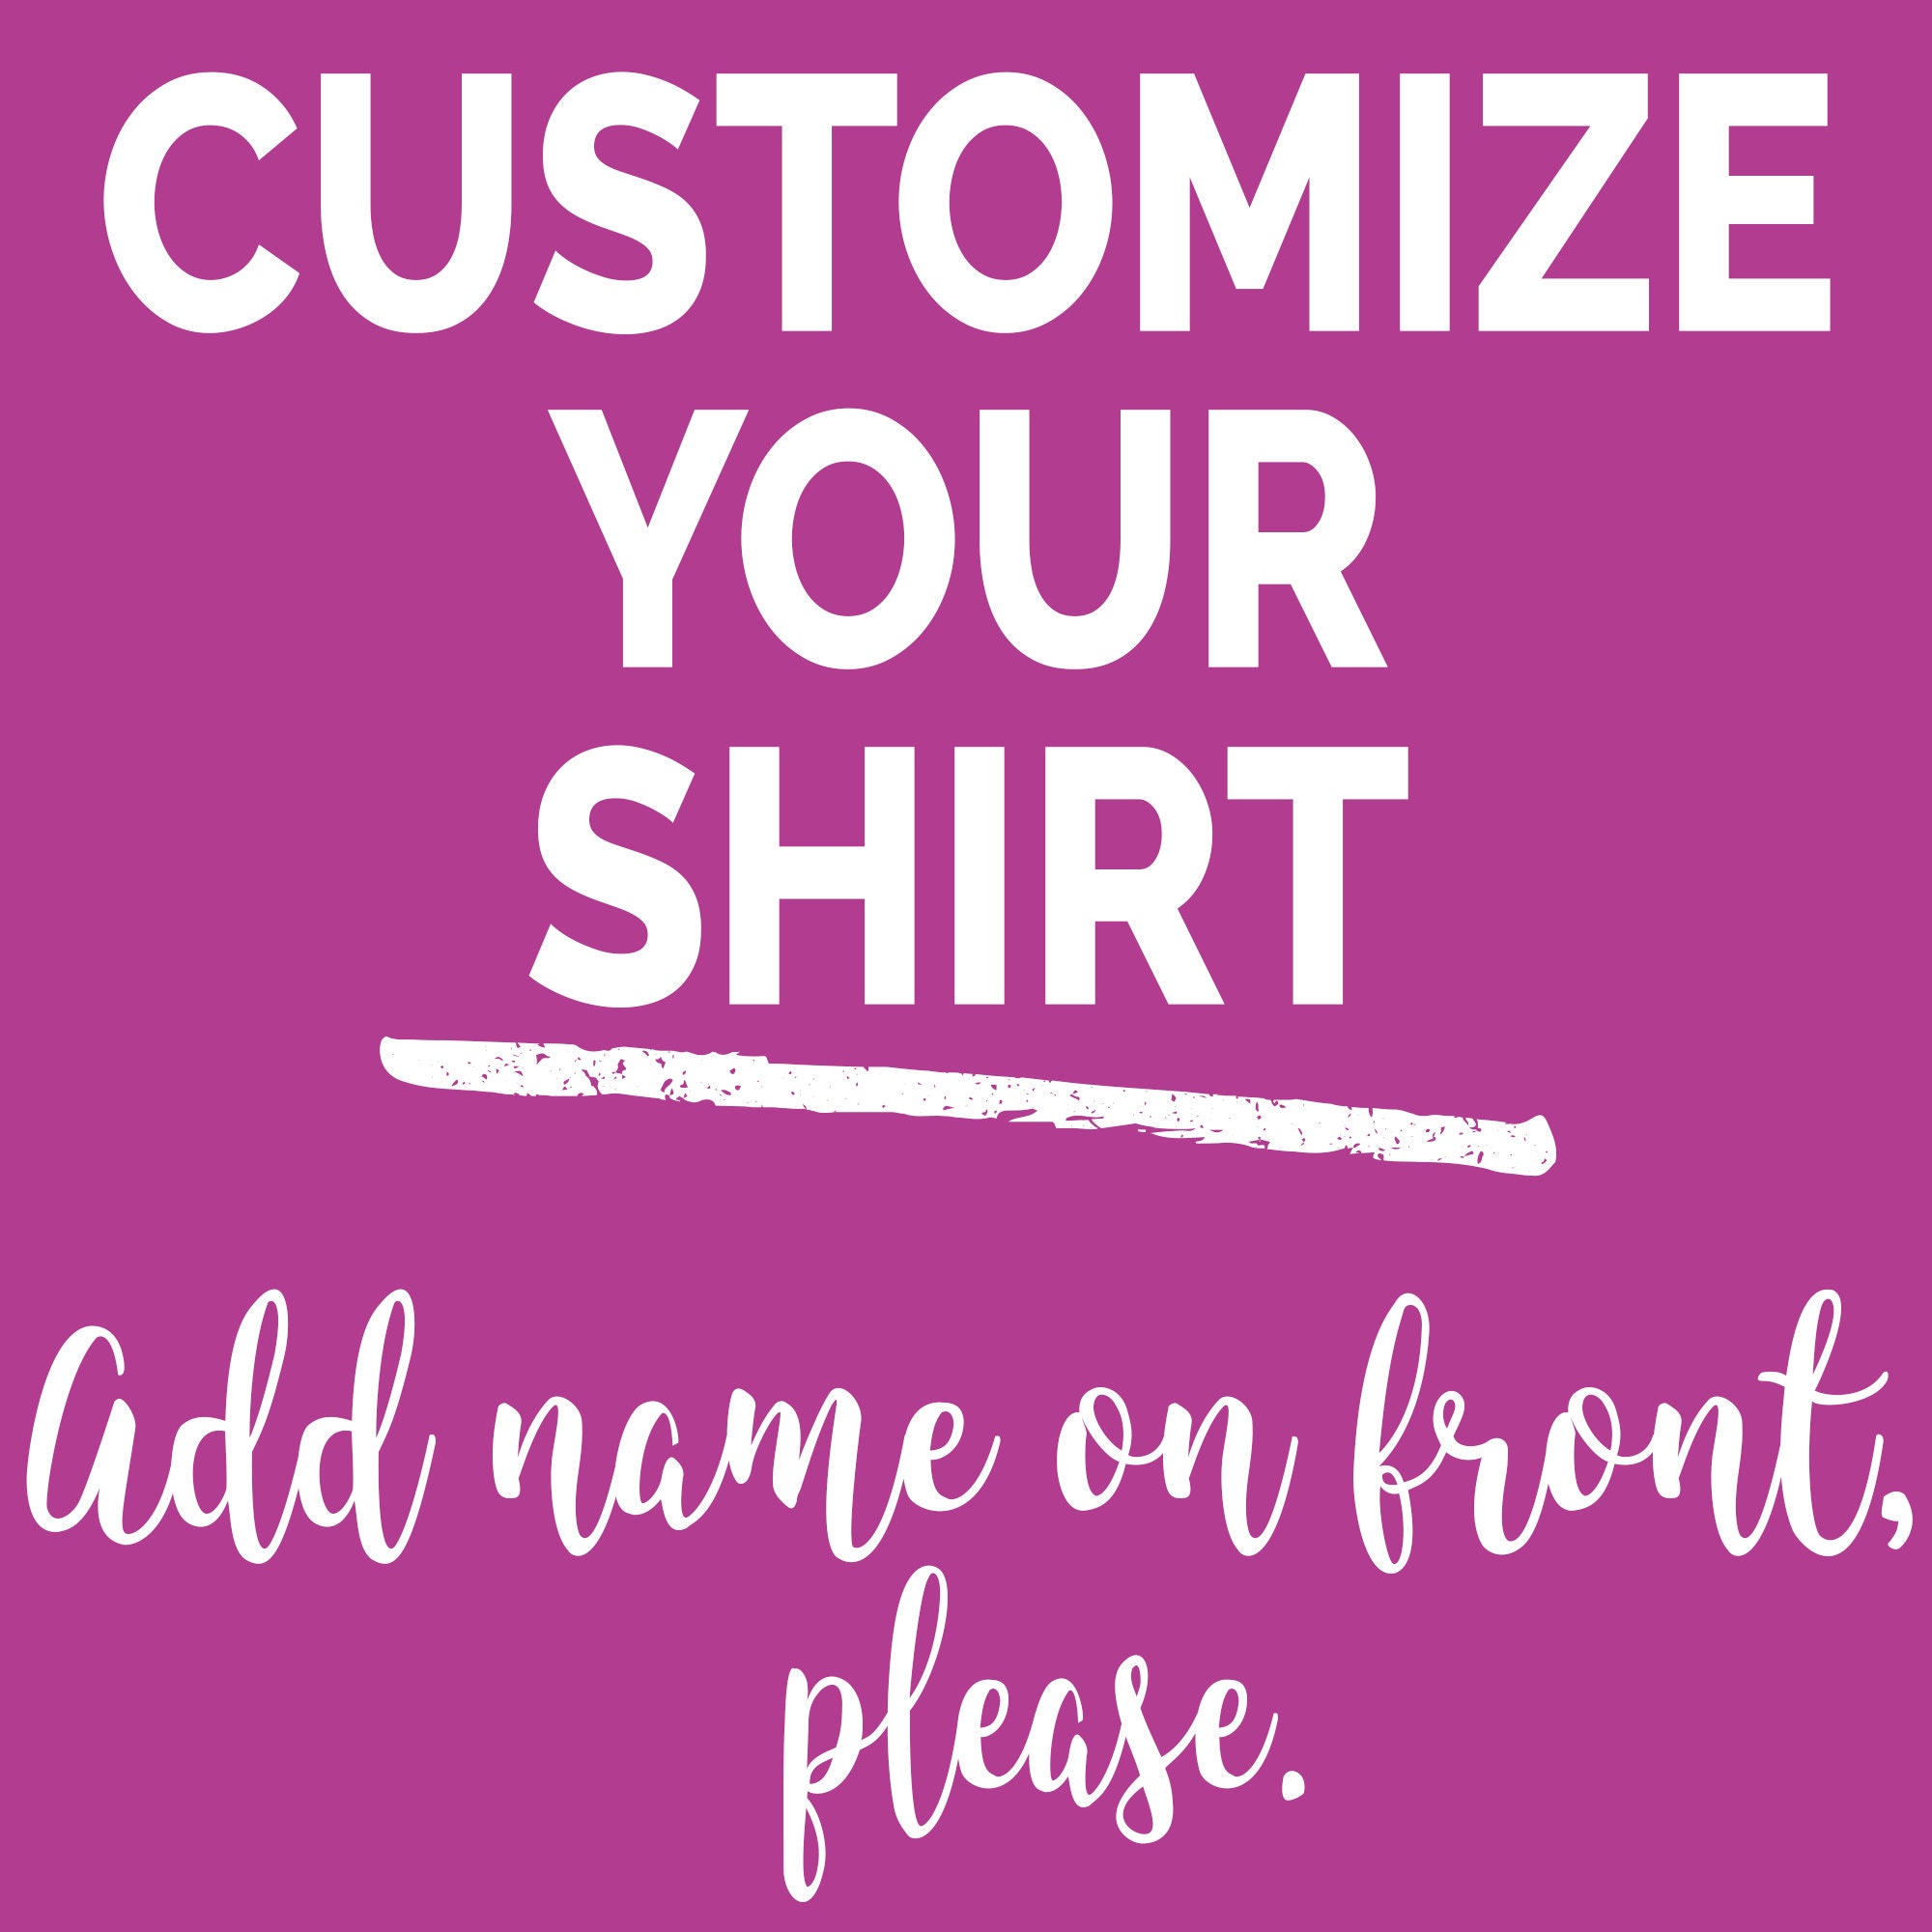 Customize Your Shirt: Add Name on Front Please | Etsy